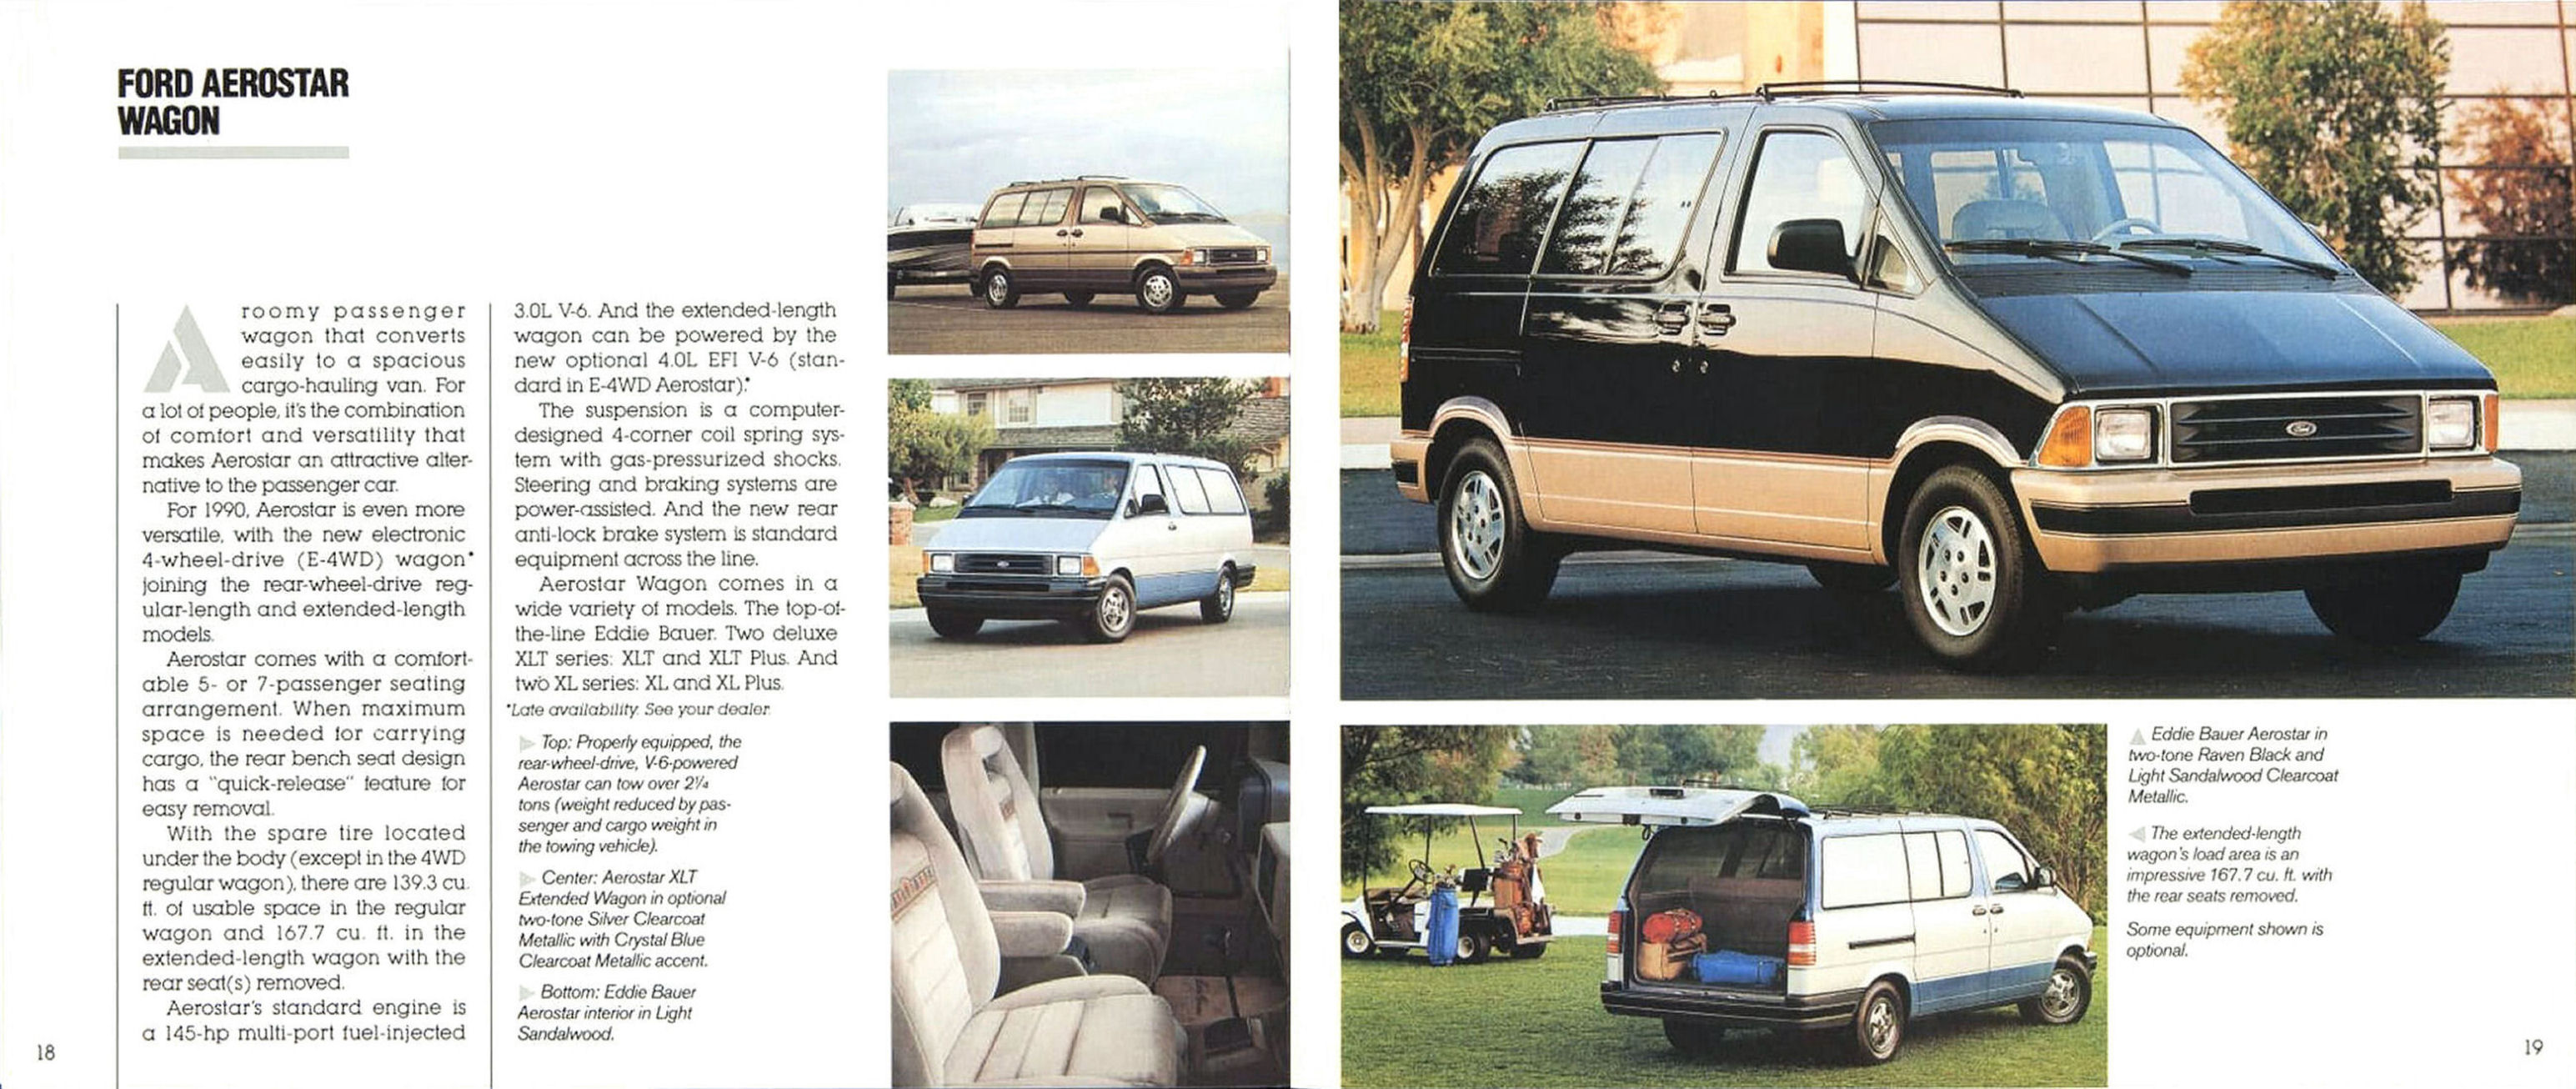 1990_Ford_Cars-18-19